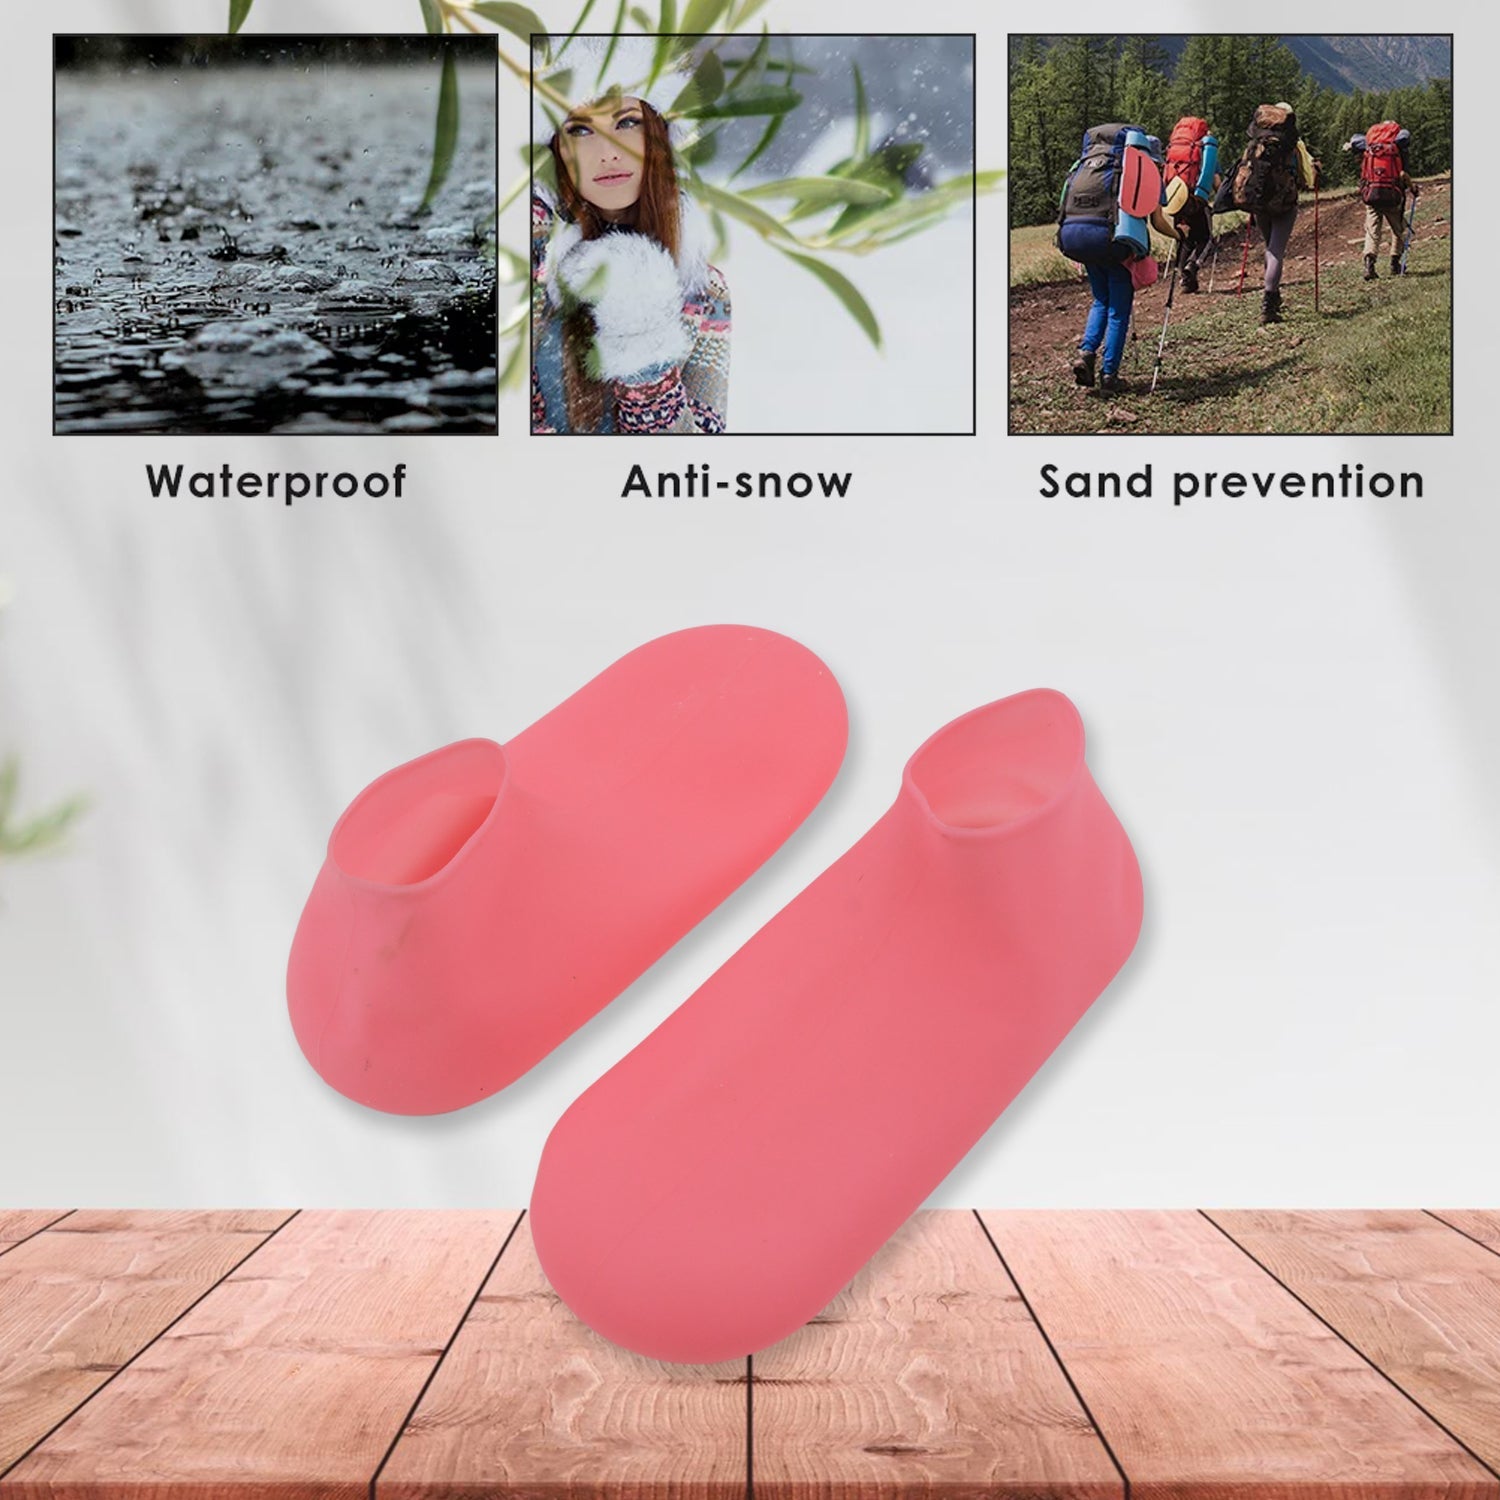 4788 Outdoor Waterproof Non-slip silicone shoe cover |Foldable, Washable & Anti Skid, Reusable & Durable cover, Suitable For Men/Women& Kids, Perfect for Cycling/Walking/Tracking etc (1 Pair)